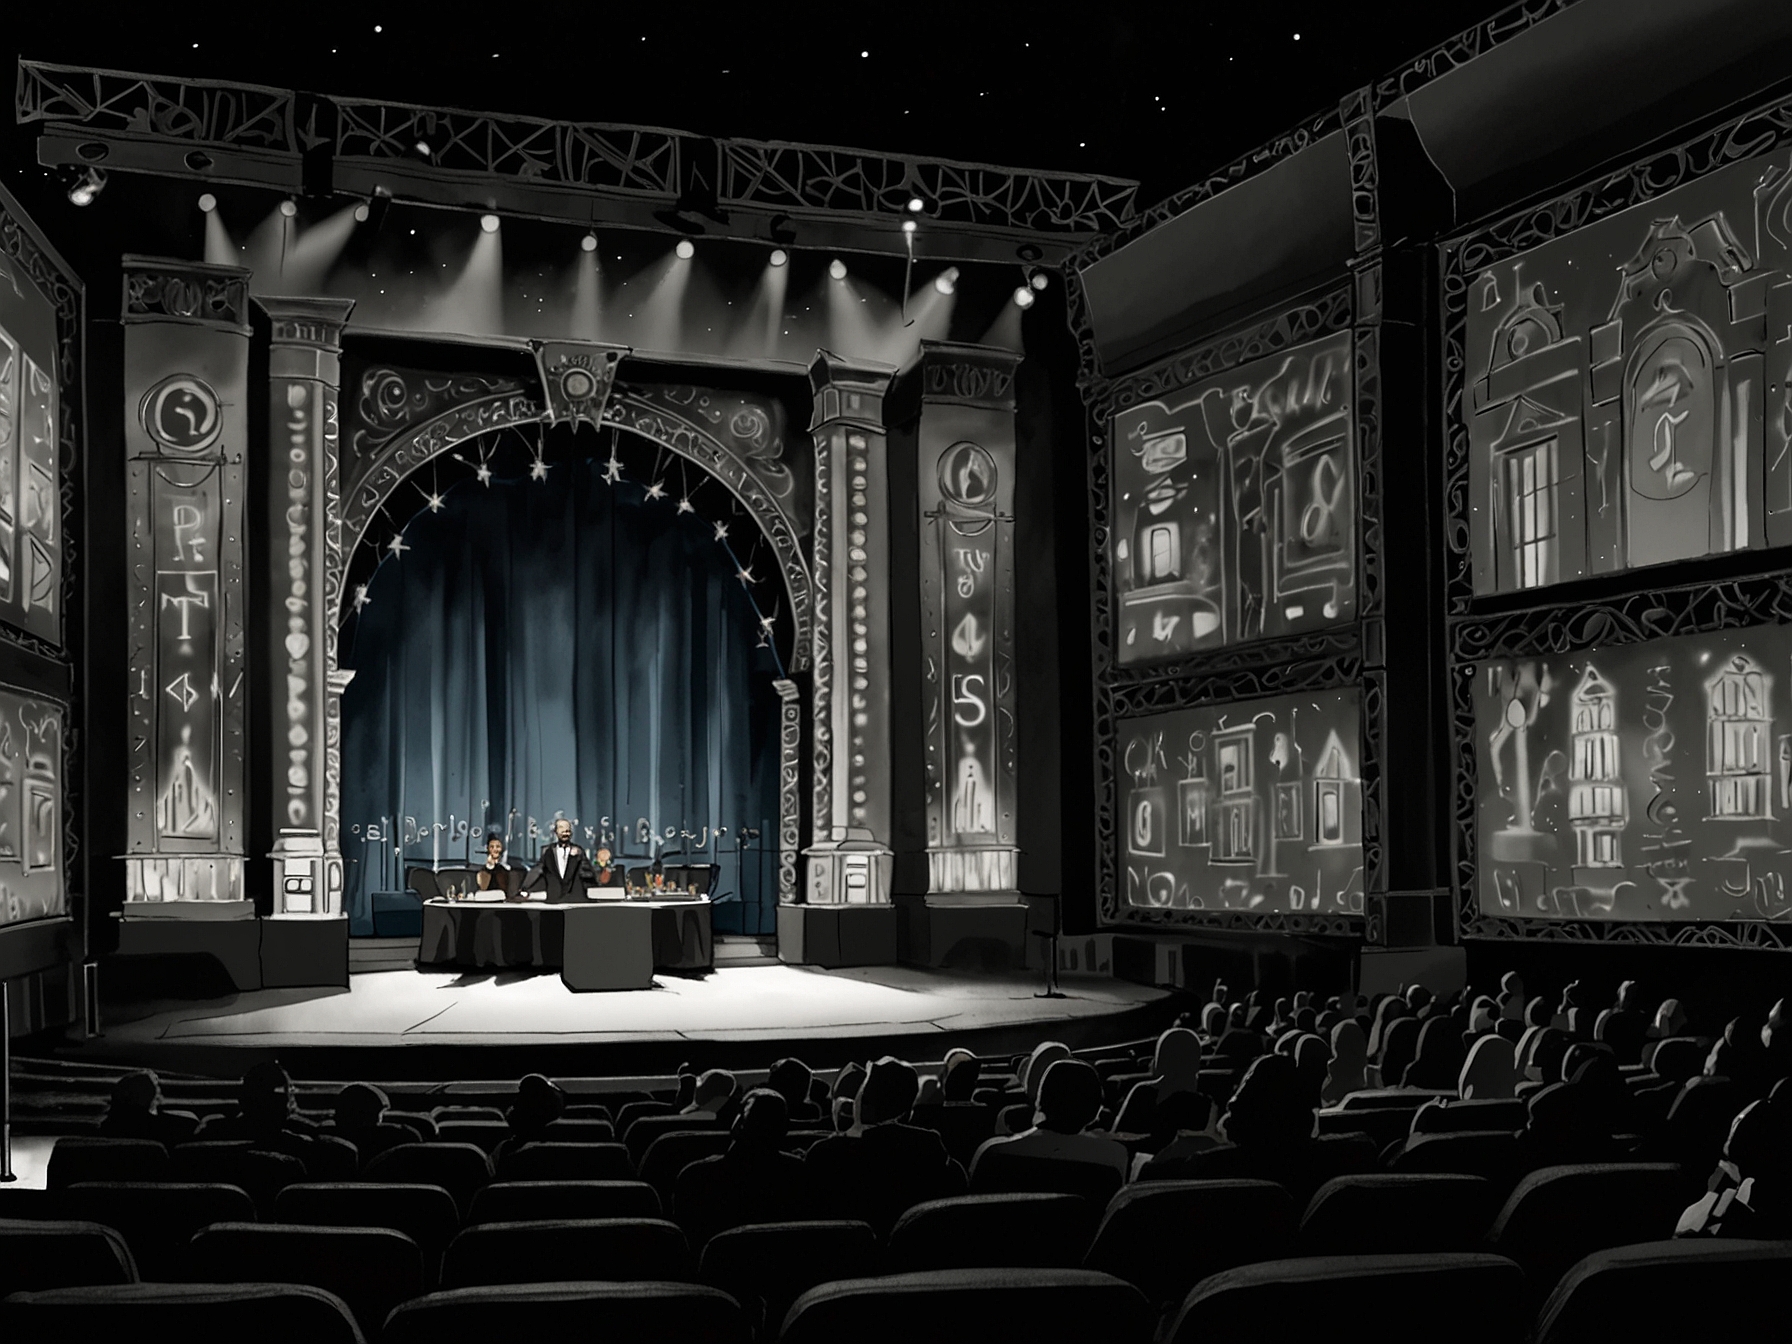 A Tony Awards stage setup with a glitzy backdrop, capturing the contrast between the event's glamour and the underlying financial woes faced by Broadway investors.